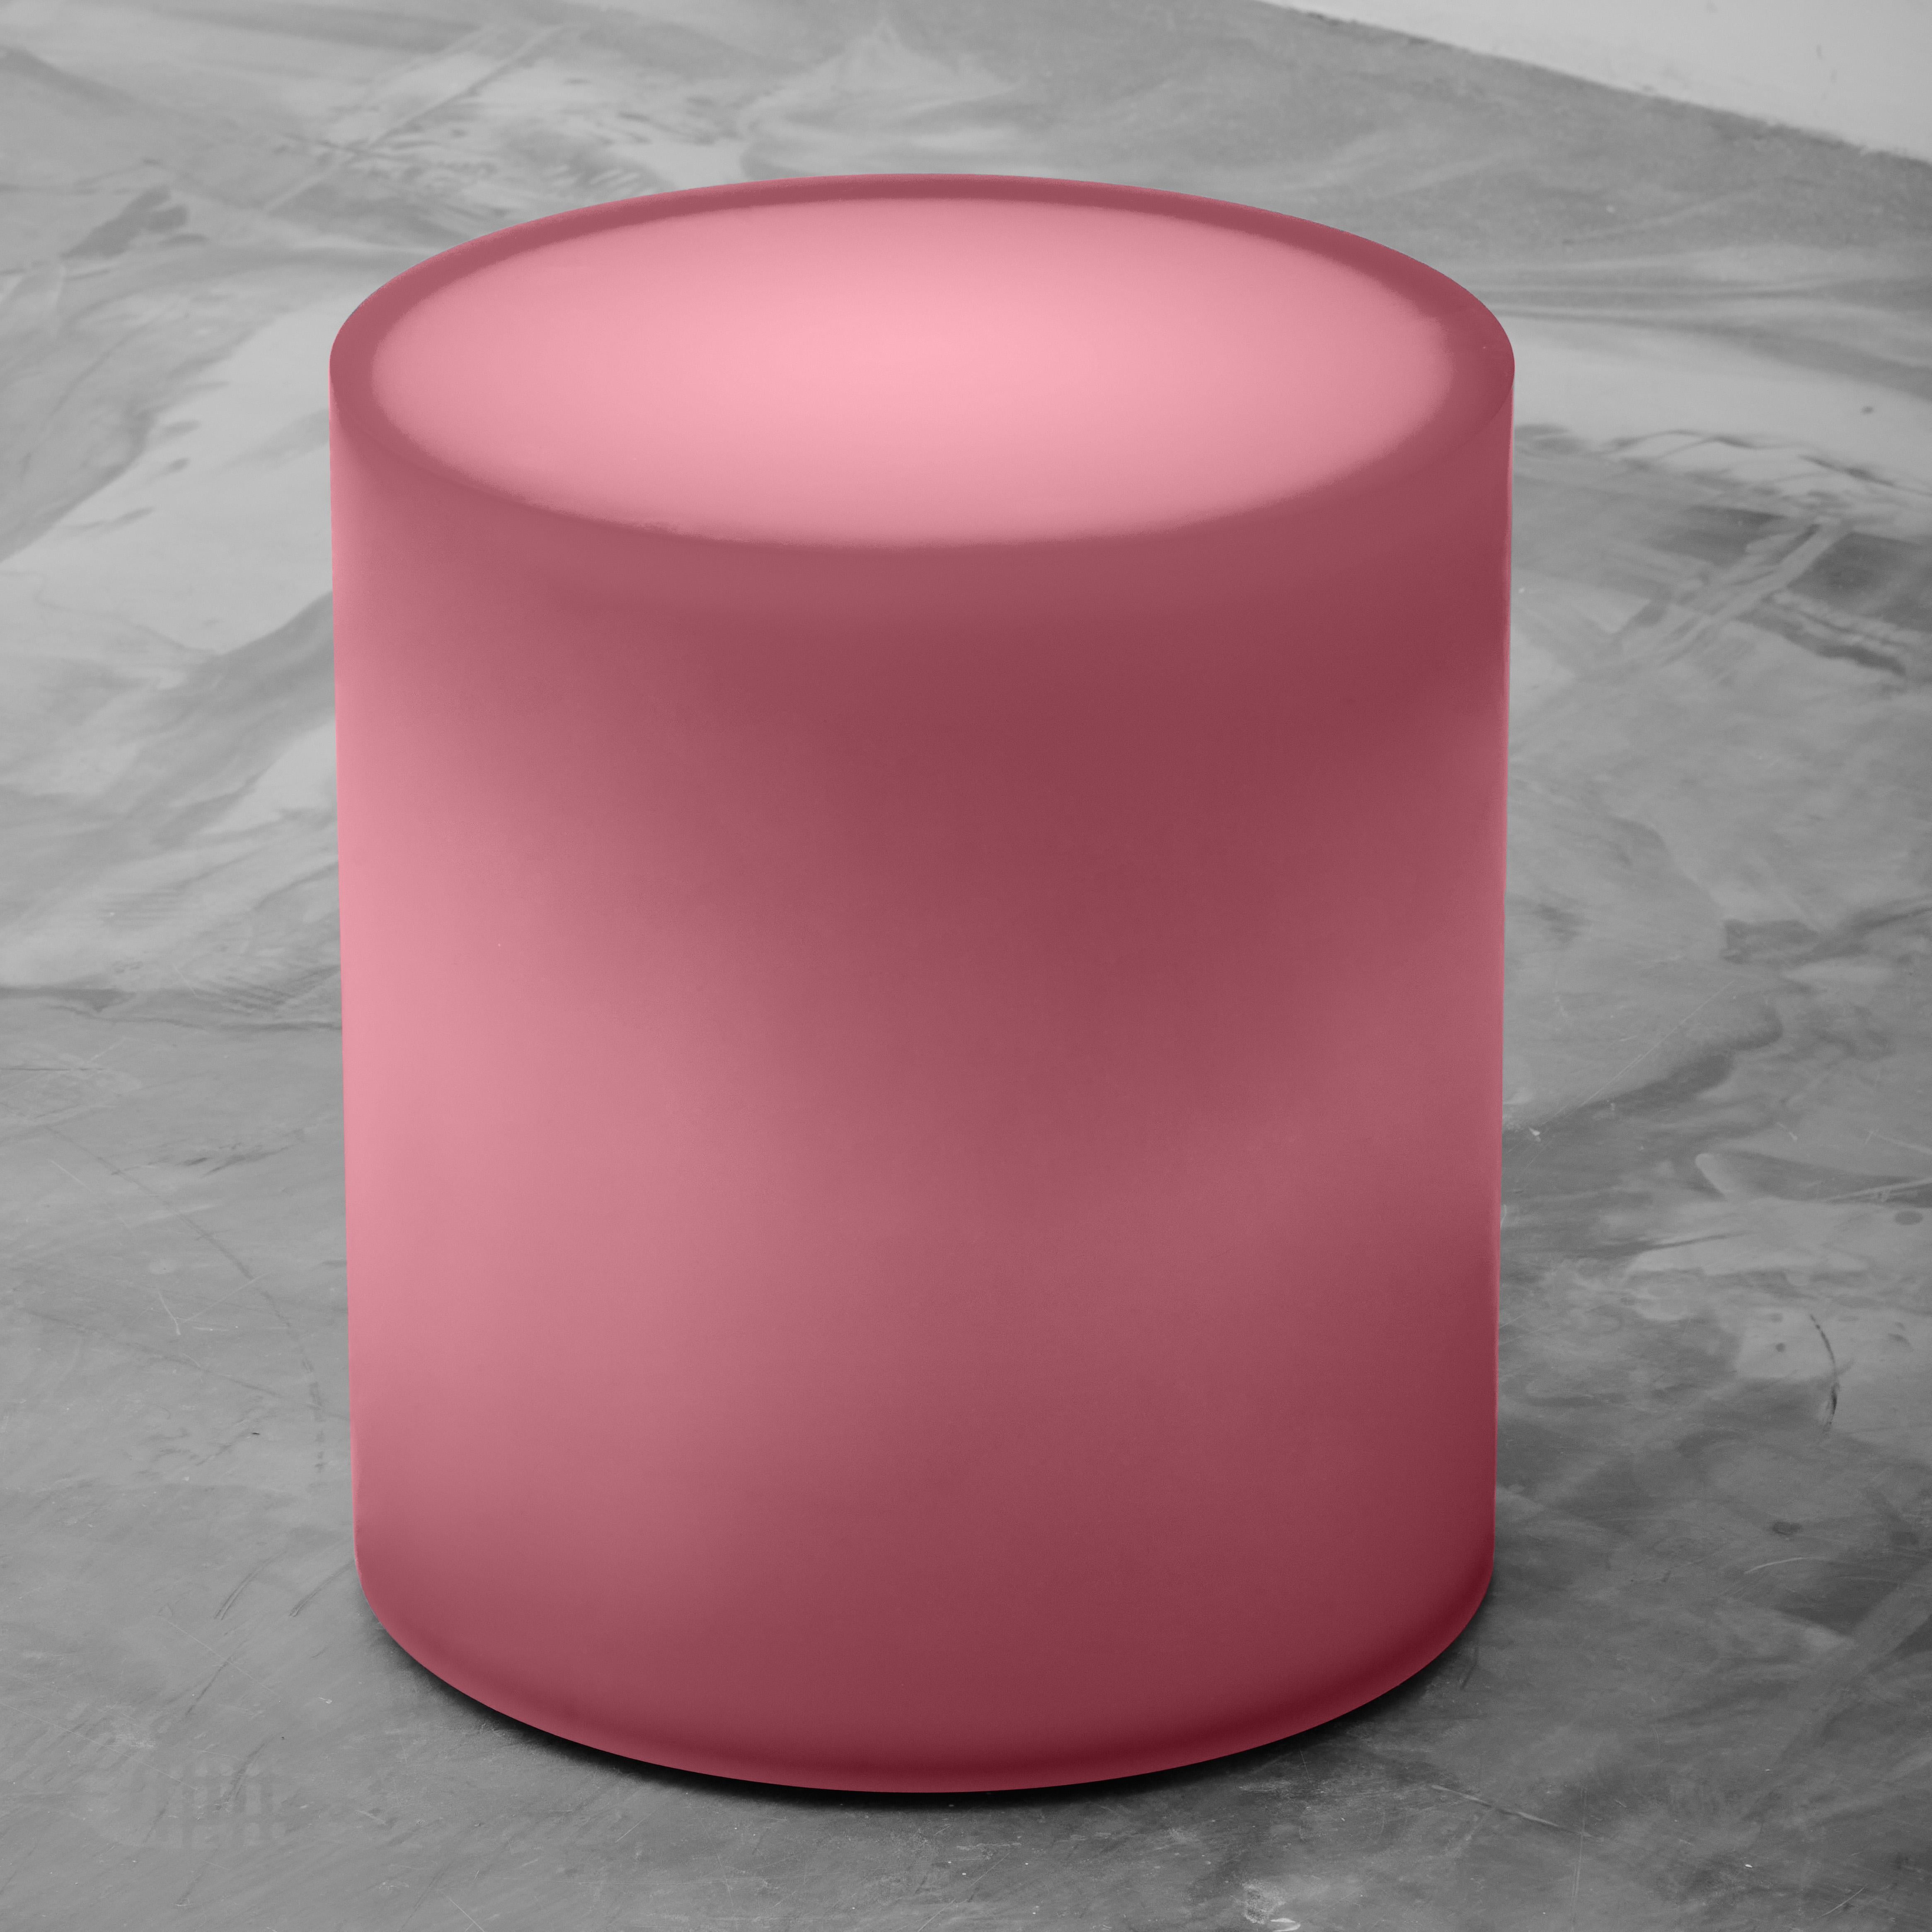 Contemporary Drum Resin Side Table/Stool In Dusty Pink by Facture, REP by Tuleste Factory For Sale